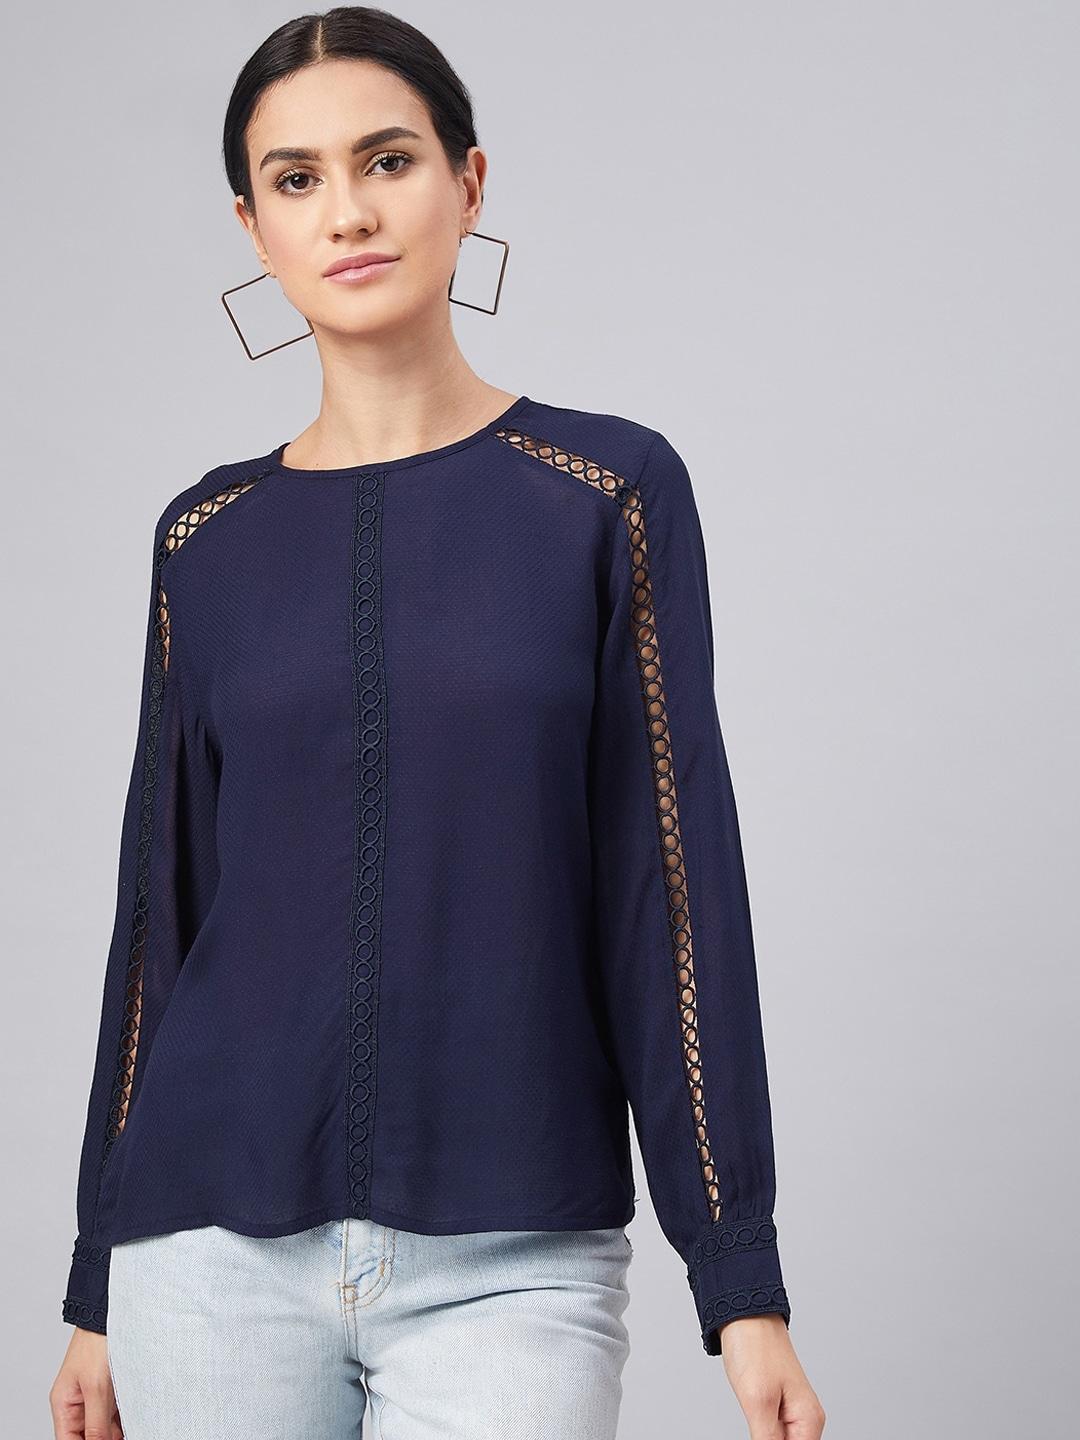 marie-claire-women-navy-blue-solid-top